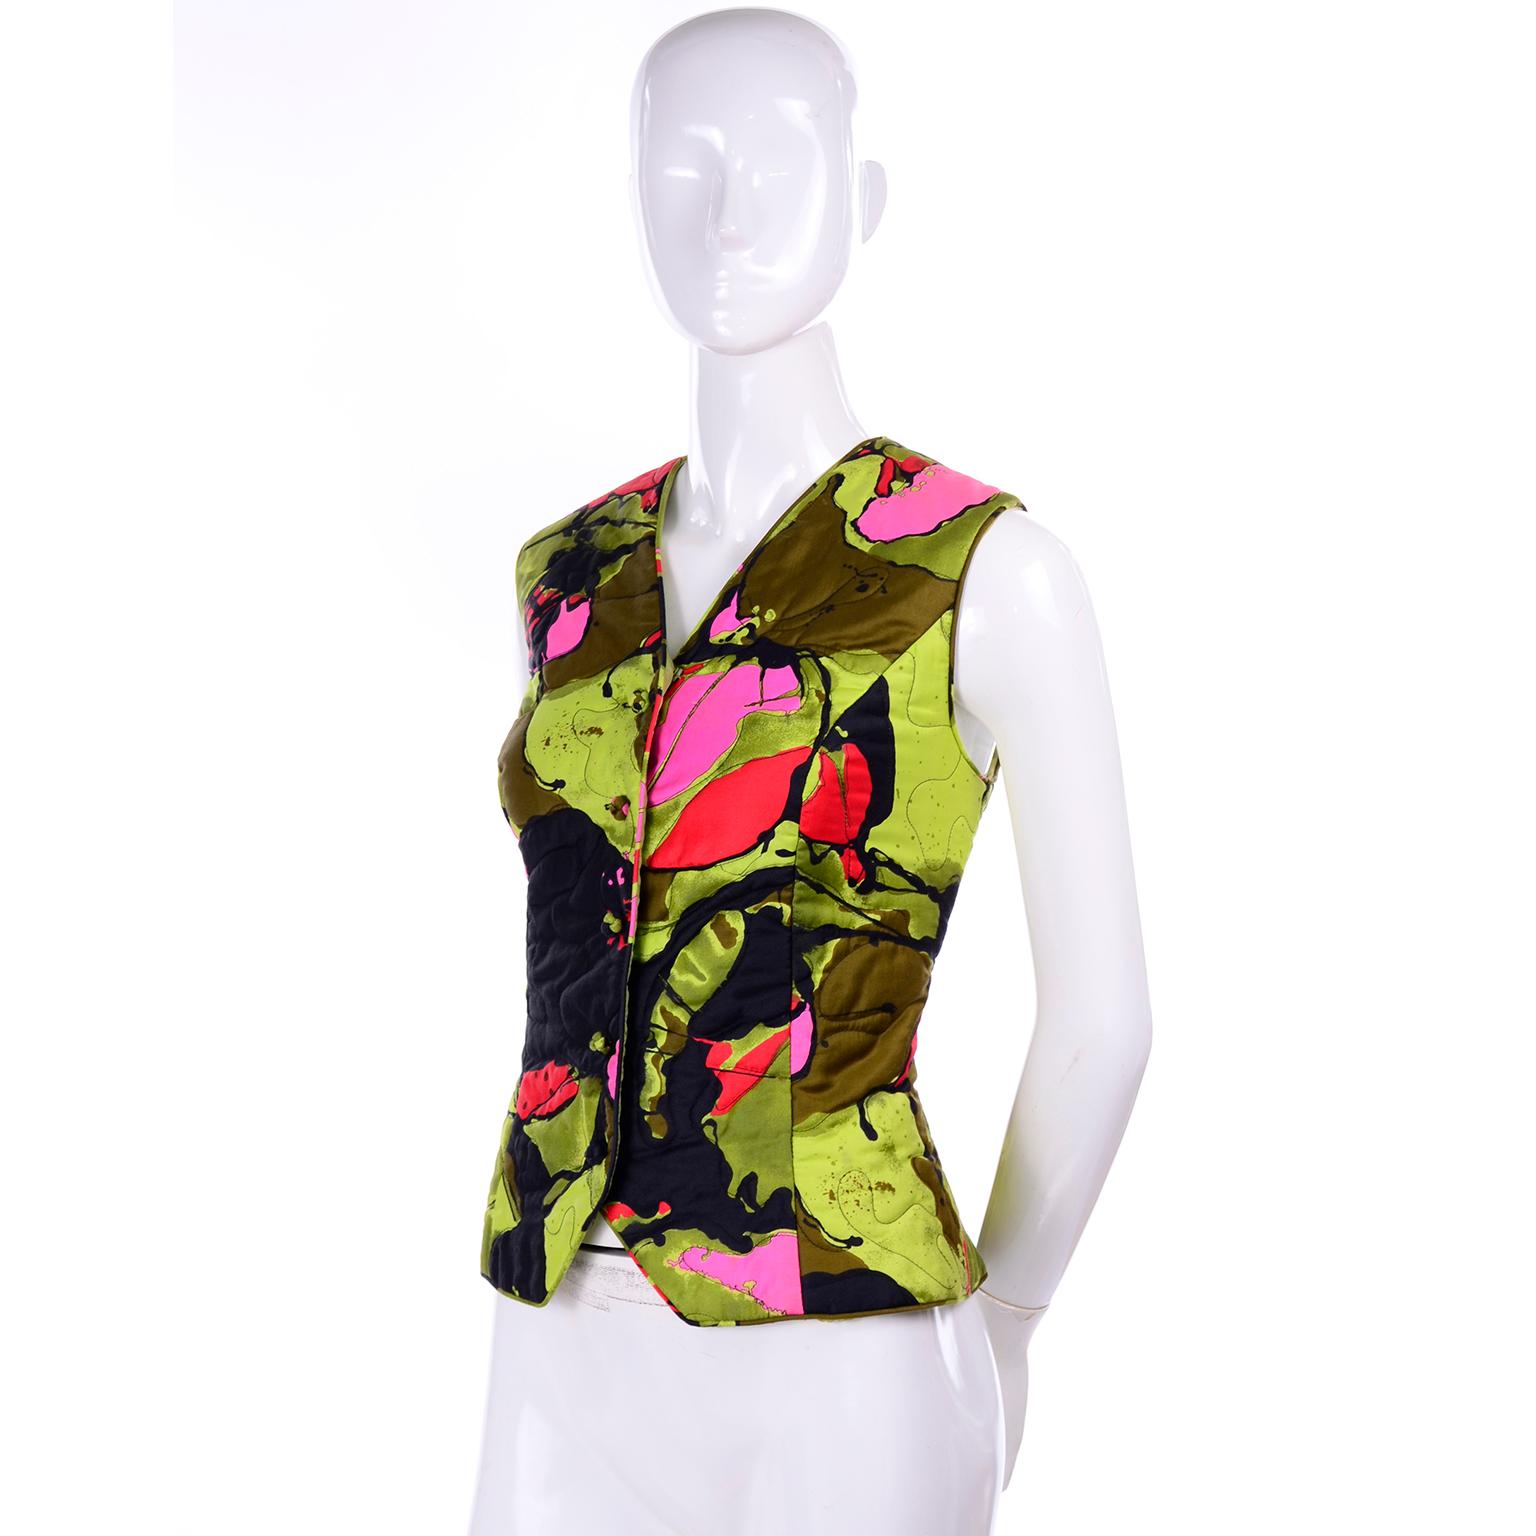 This is fun and colorful late 1960's vest from Dynasty. Wear it as a vest or as a sleeveless top, either way, it is a great piece to add to your closet! The print is an abstract floral, with splatters of army and lime green, hot pink, and red. The